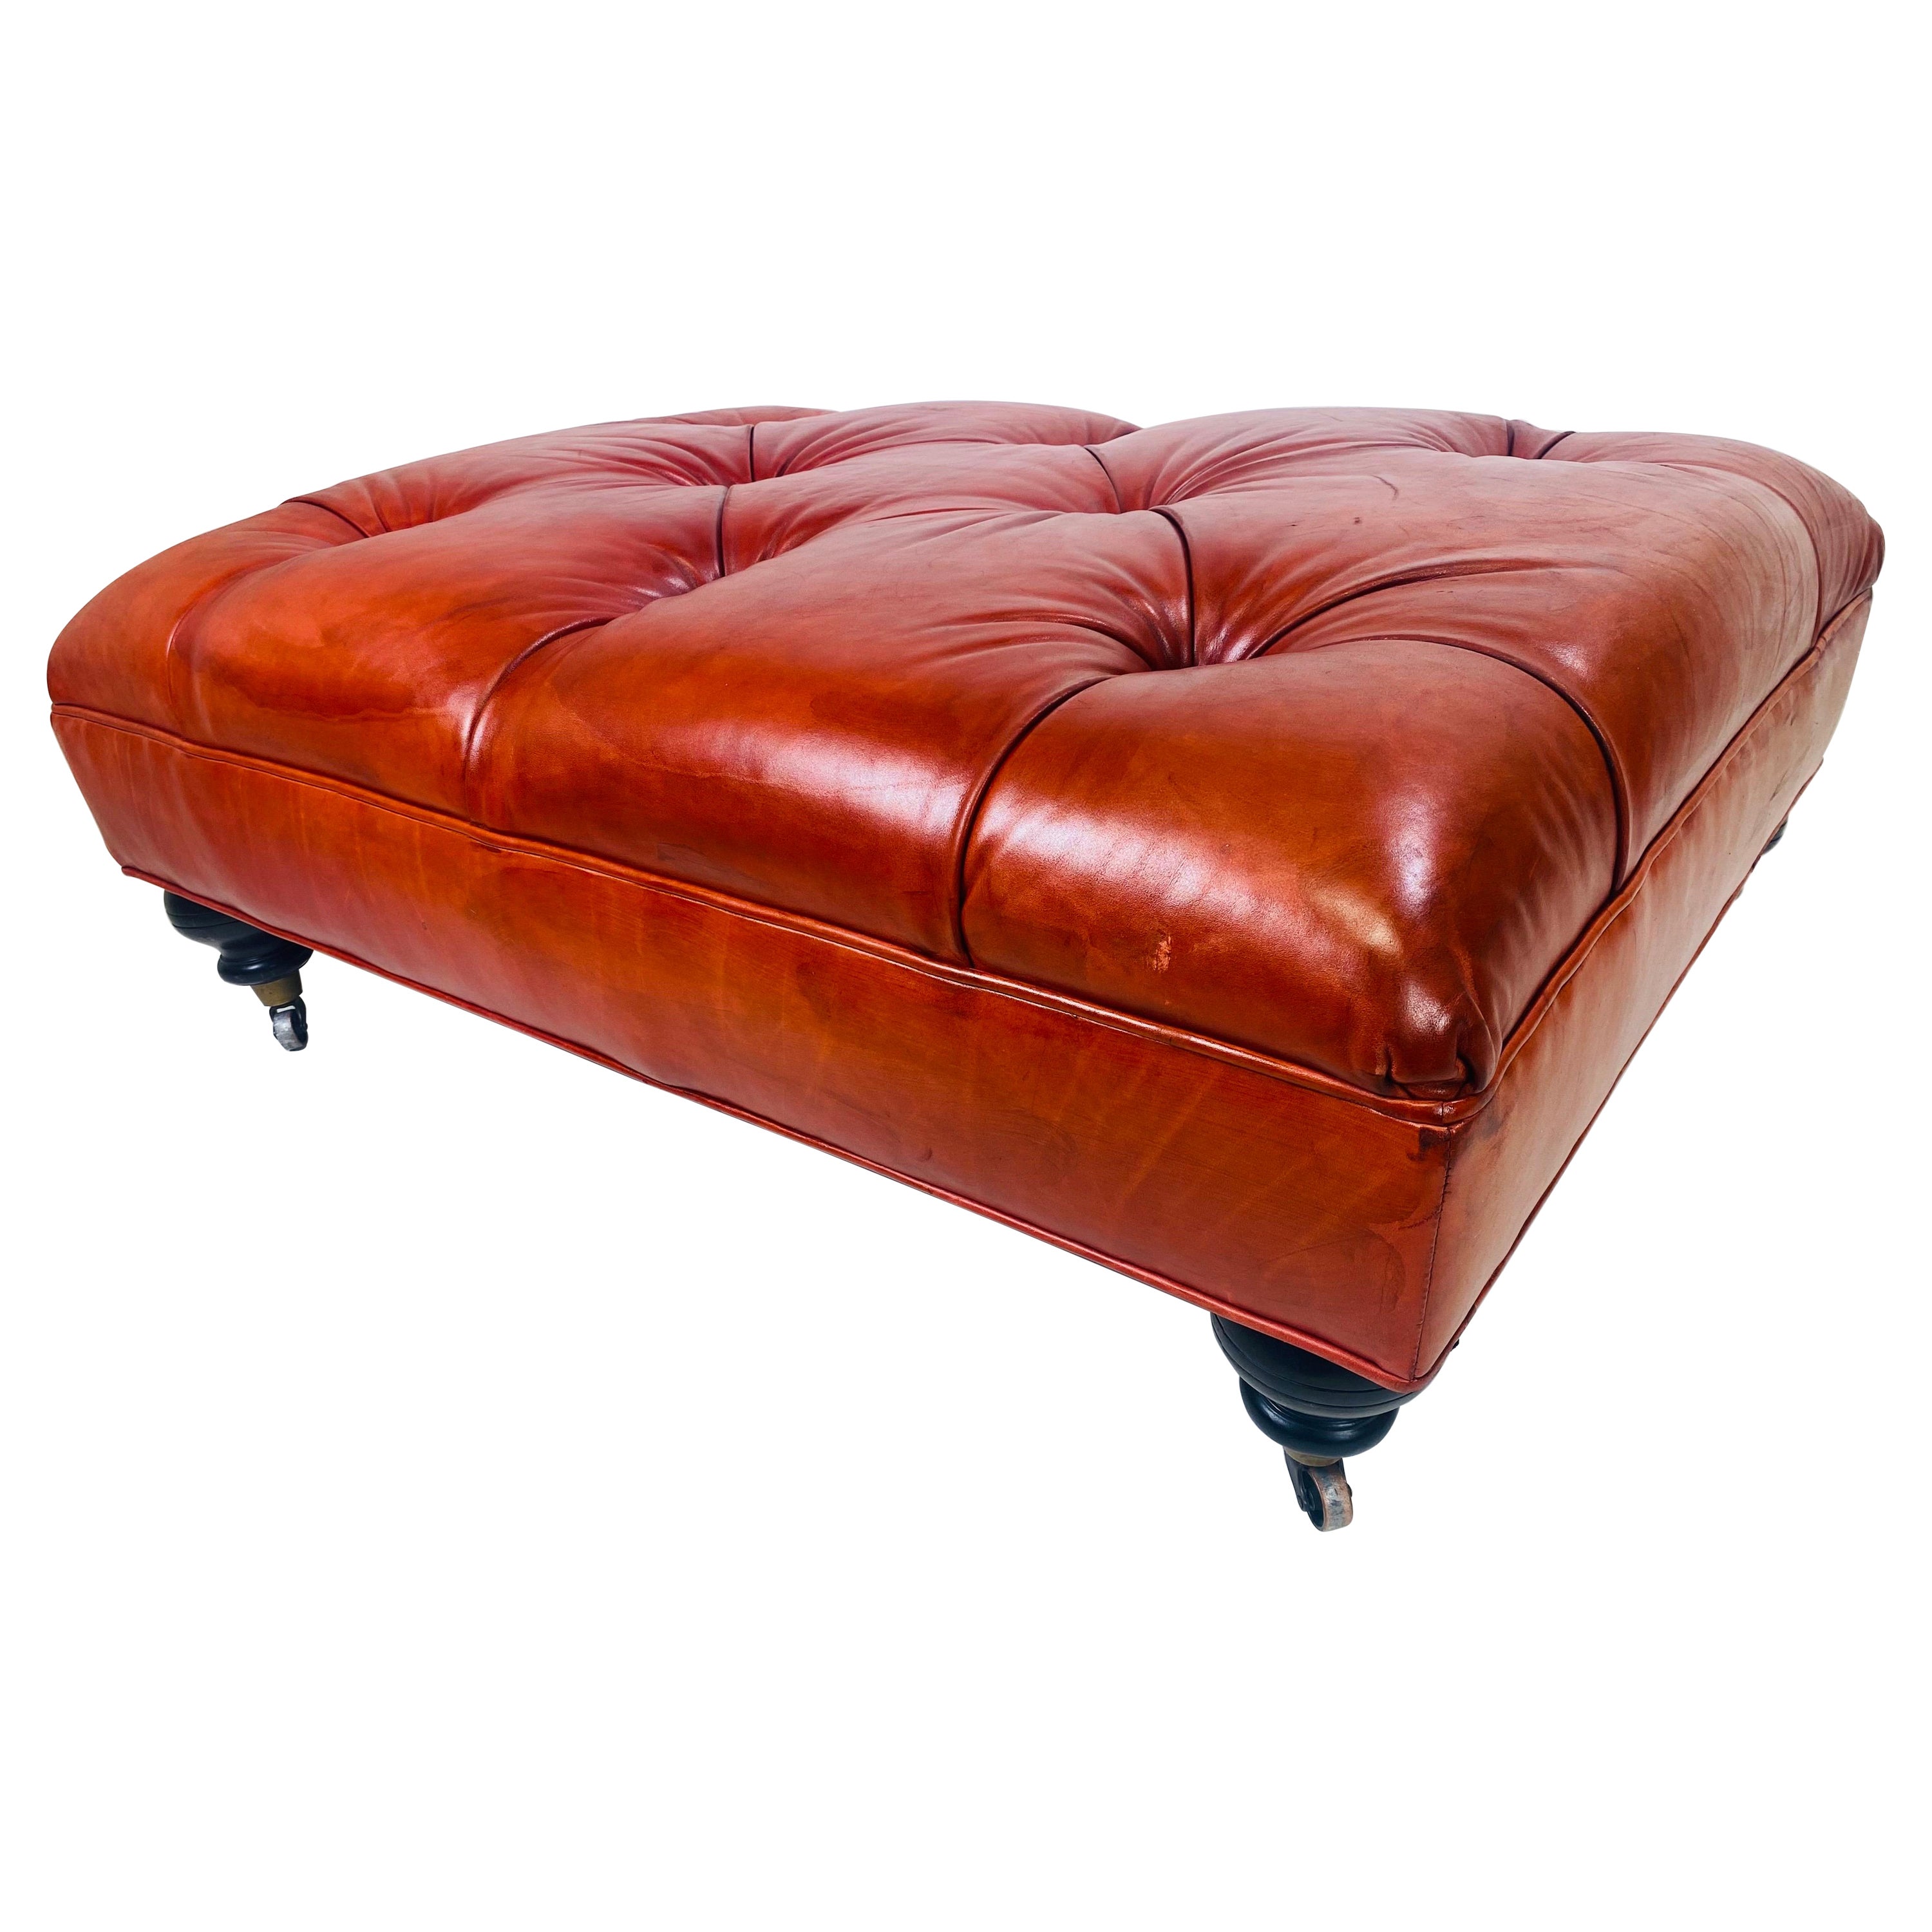 Vintage English traditional style tufted leather ottoman. For Sale